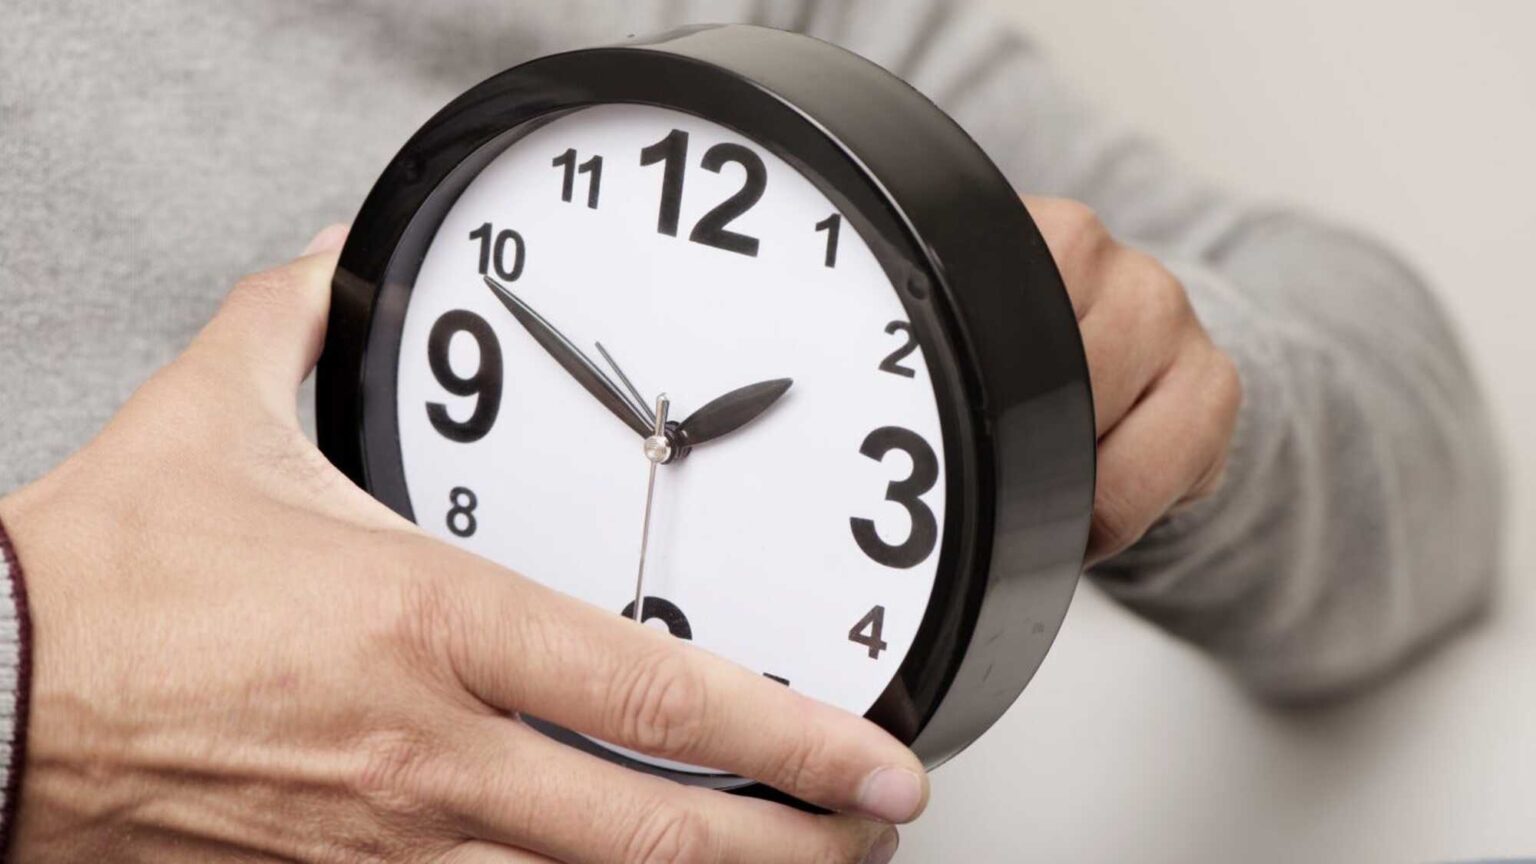 It's daylight savings time again! Are you ready to reset your clocks? It looks like time activists are not on board. Here's everything you need to know.